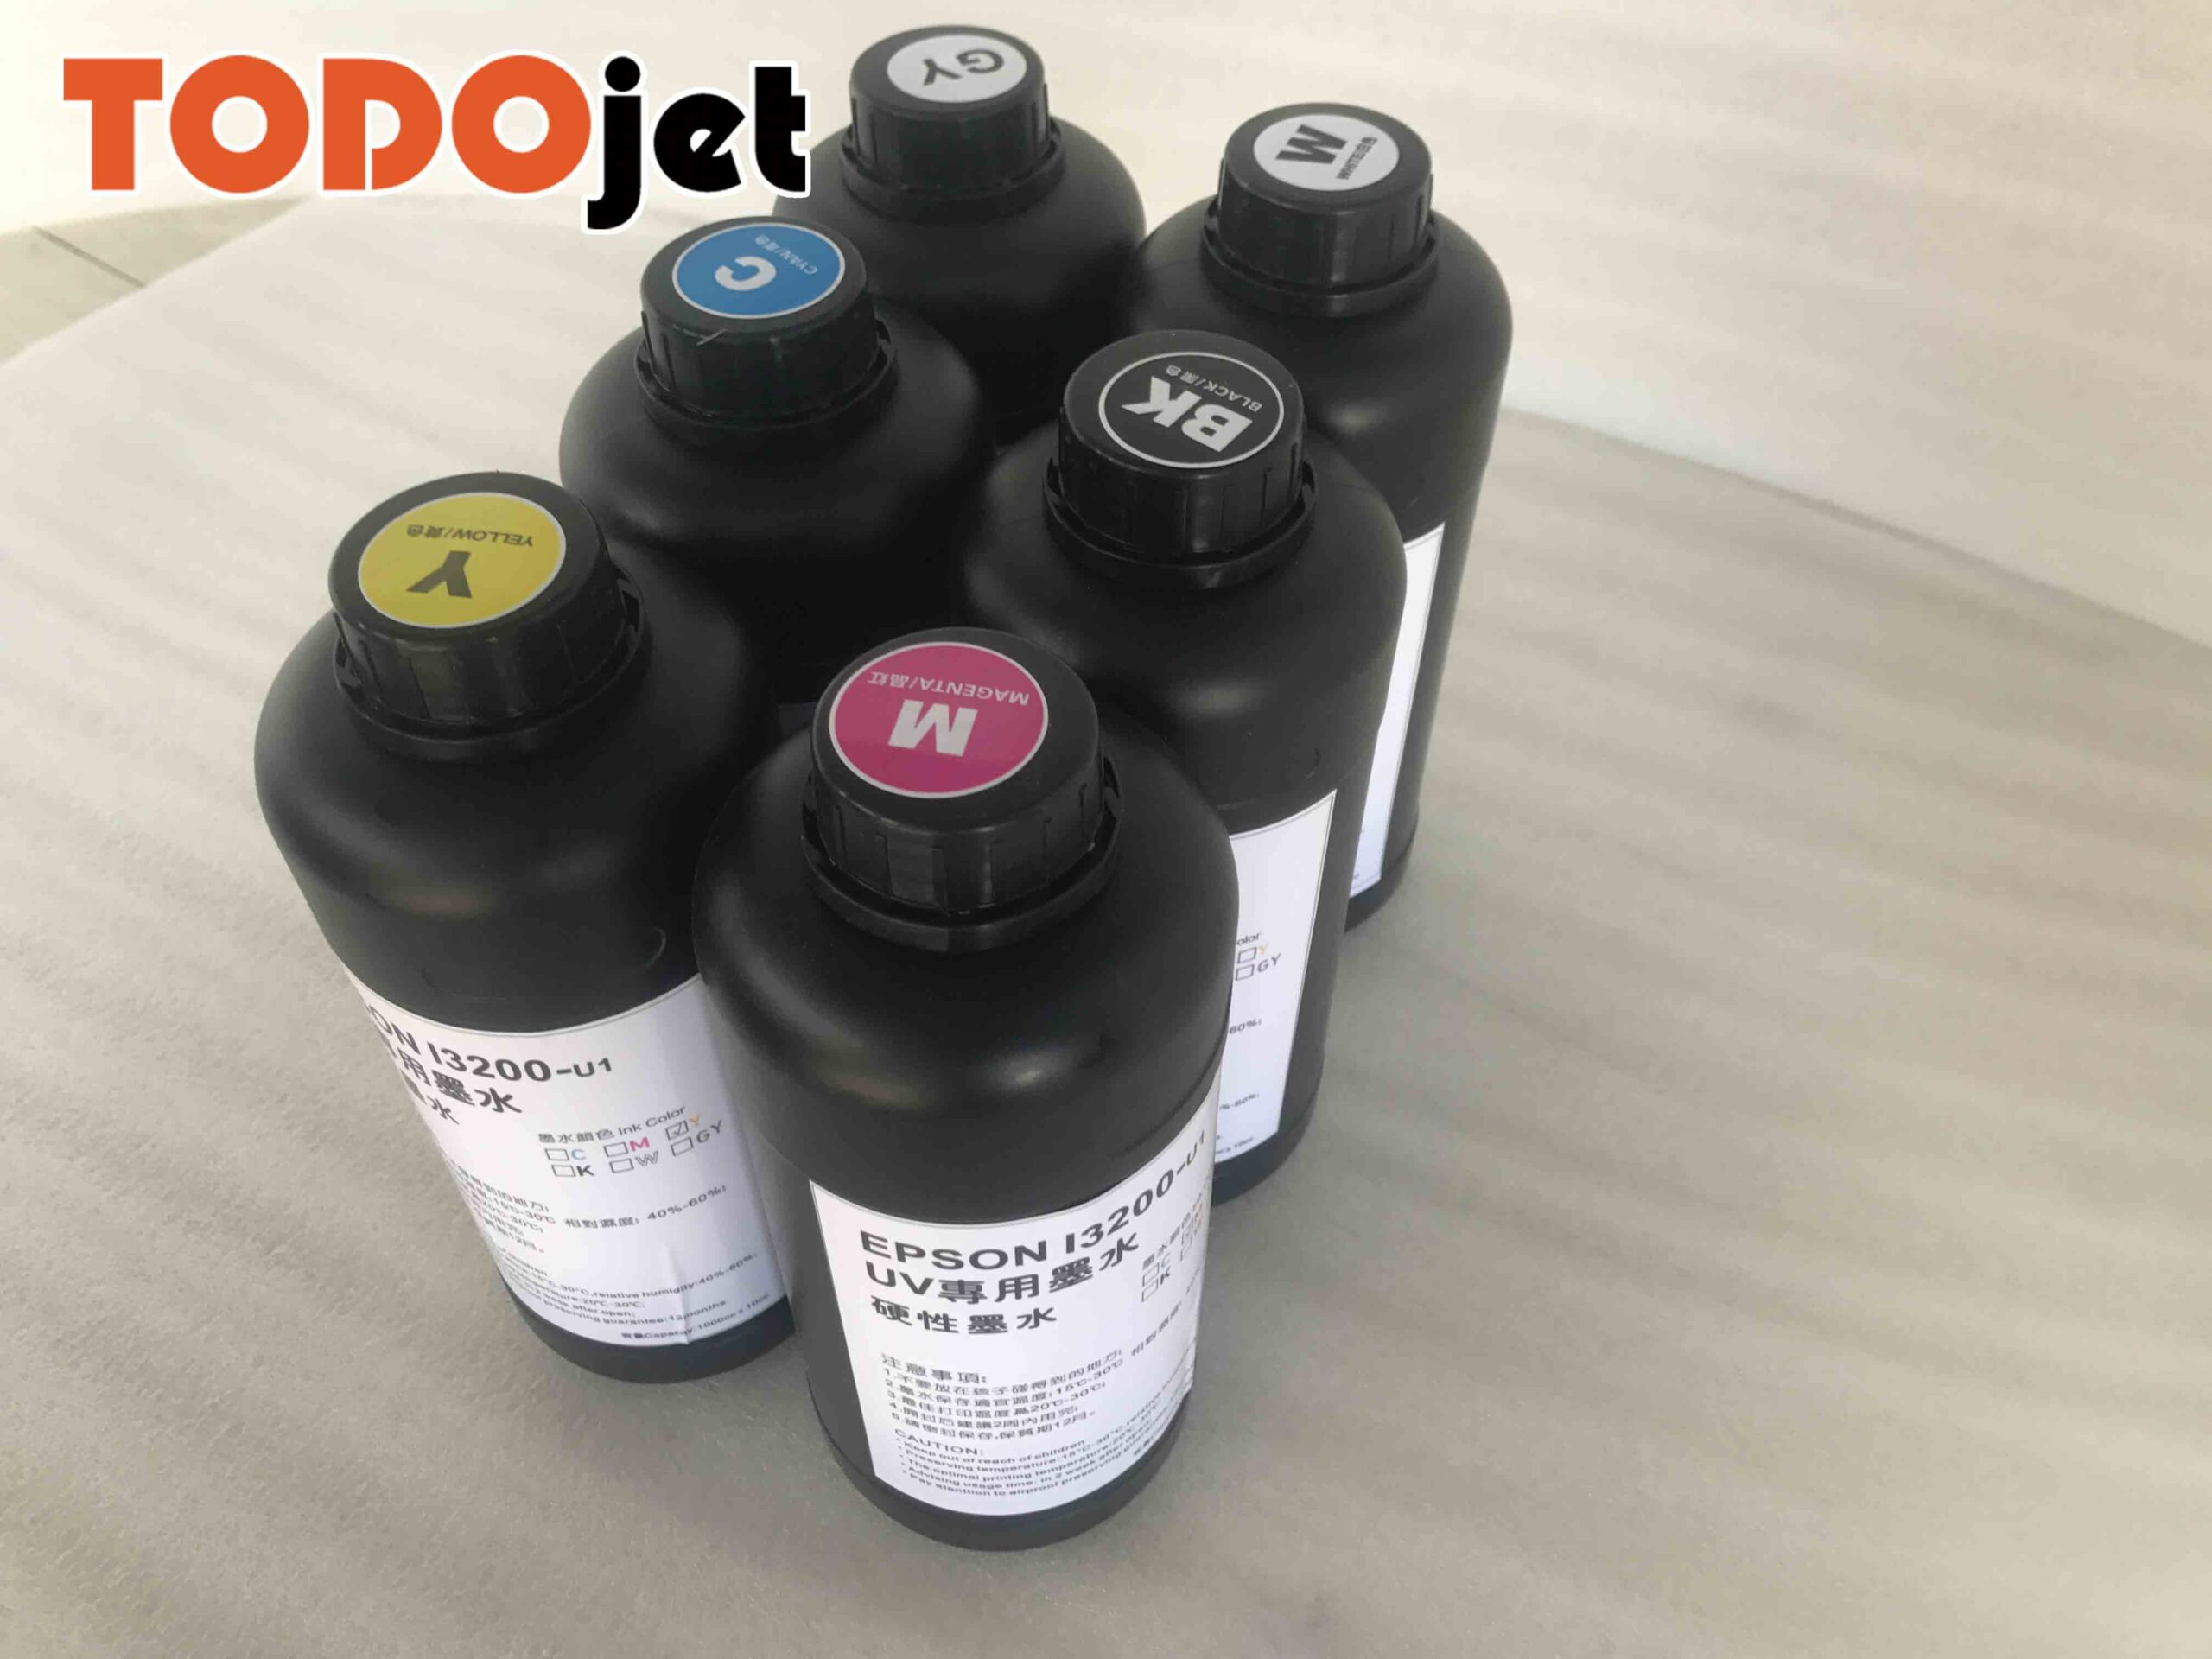 How do UV printer users choose more suitable UV inks?